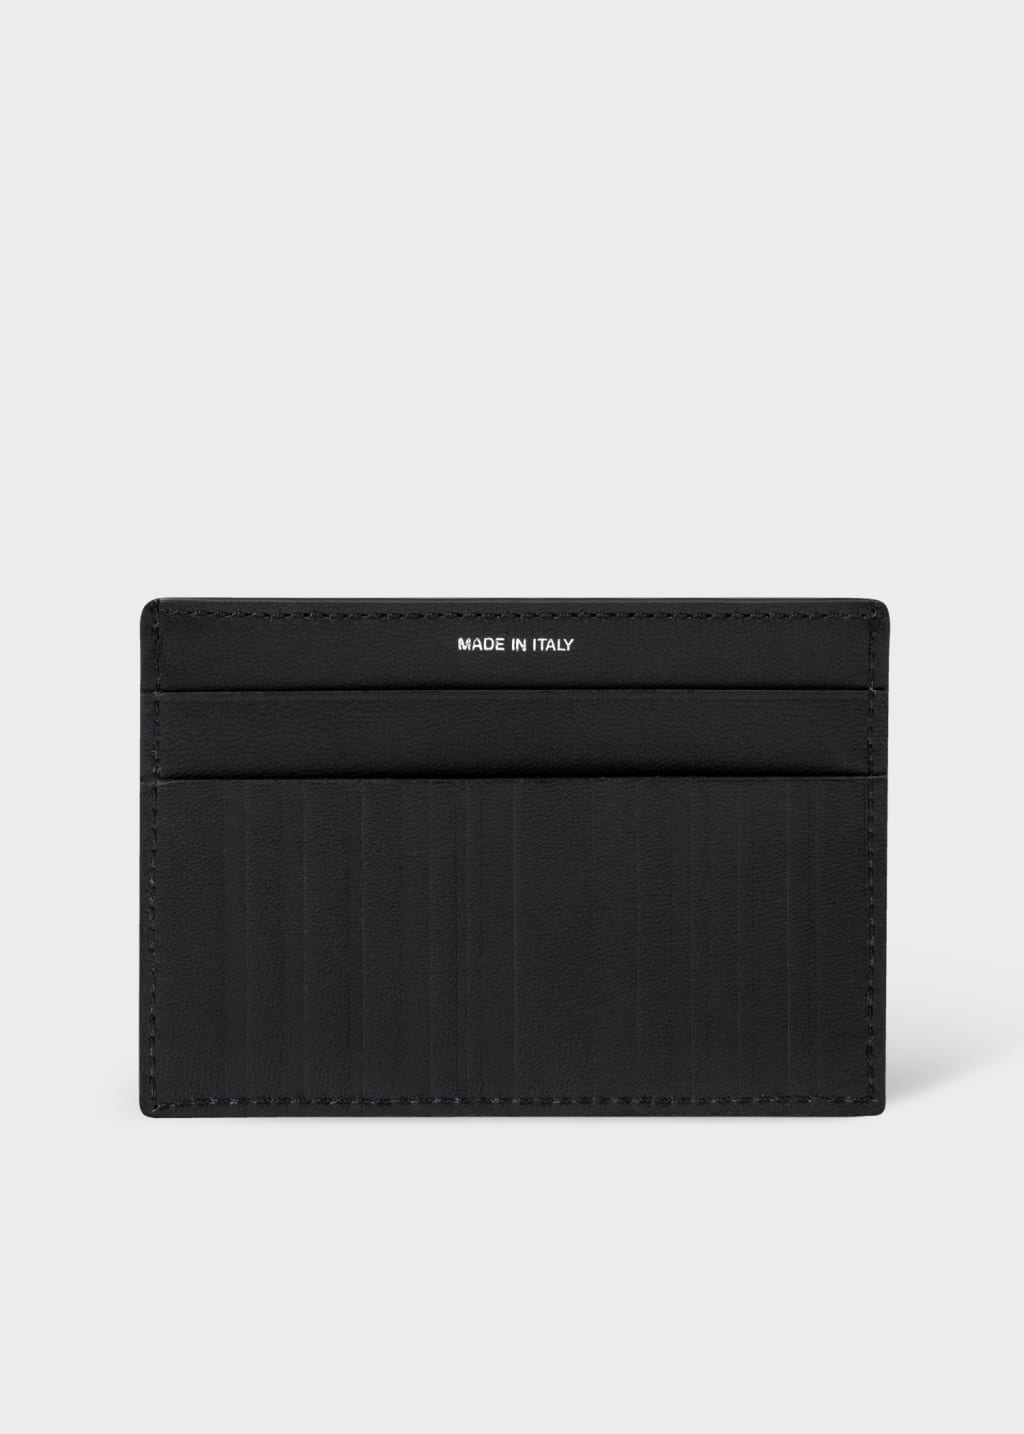 Back View - Black Leather 'Shadow Stripe' Credit Card Holder Paul Smith